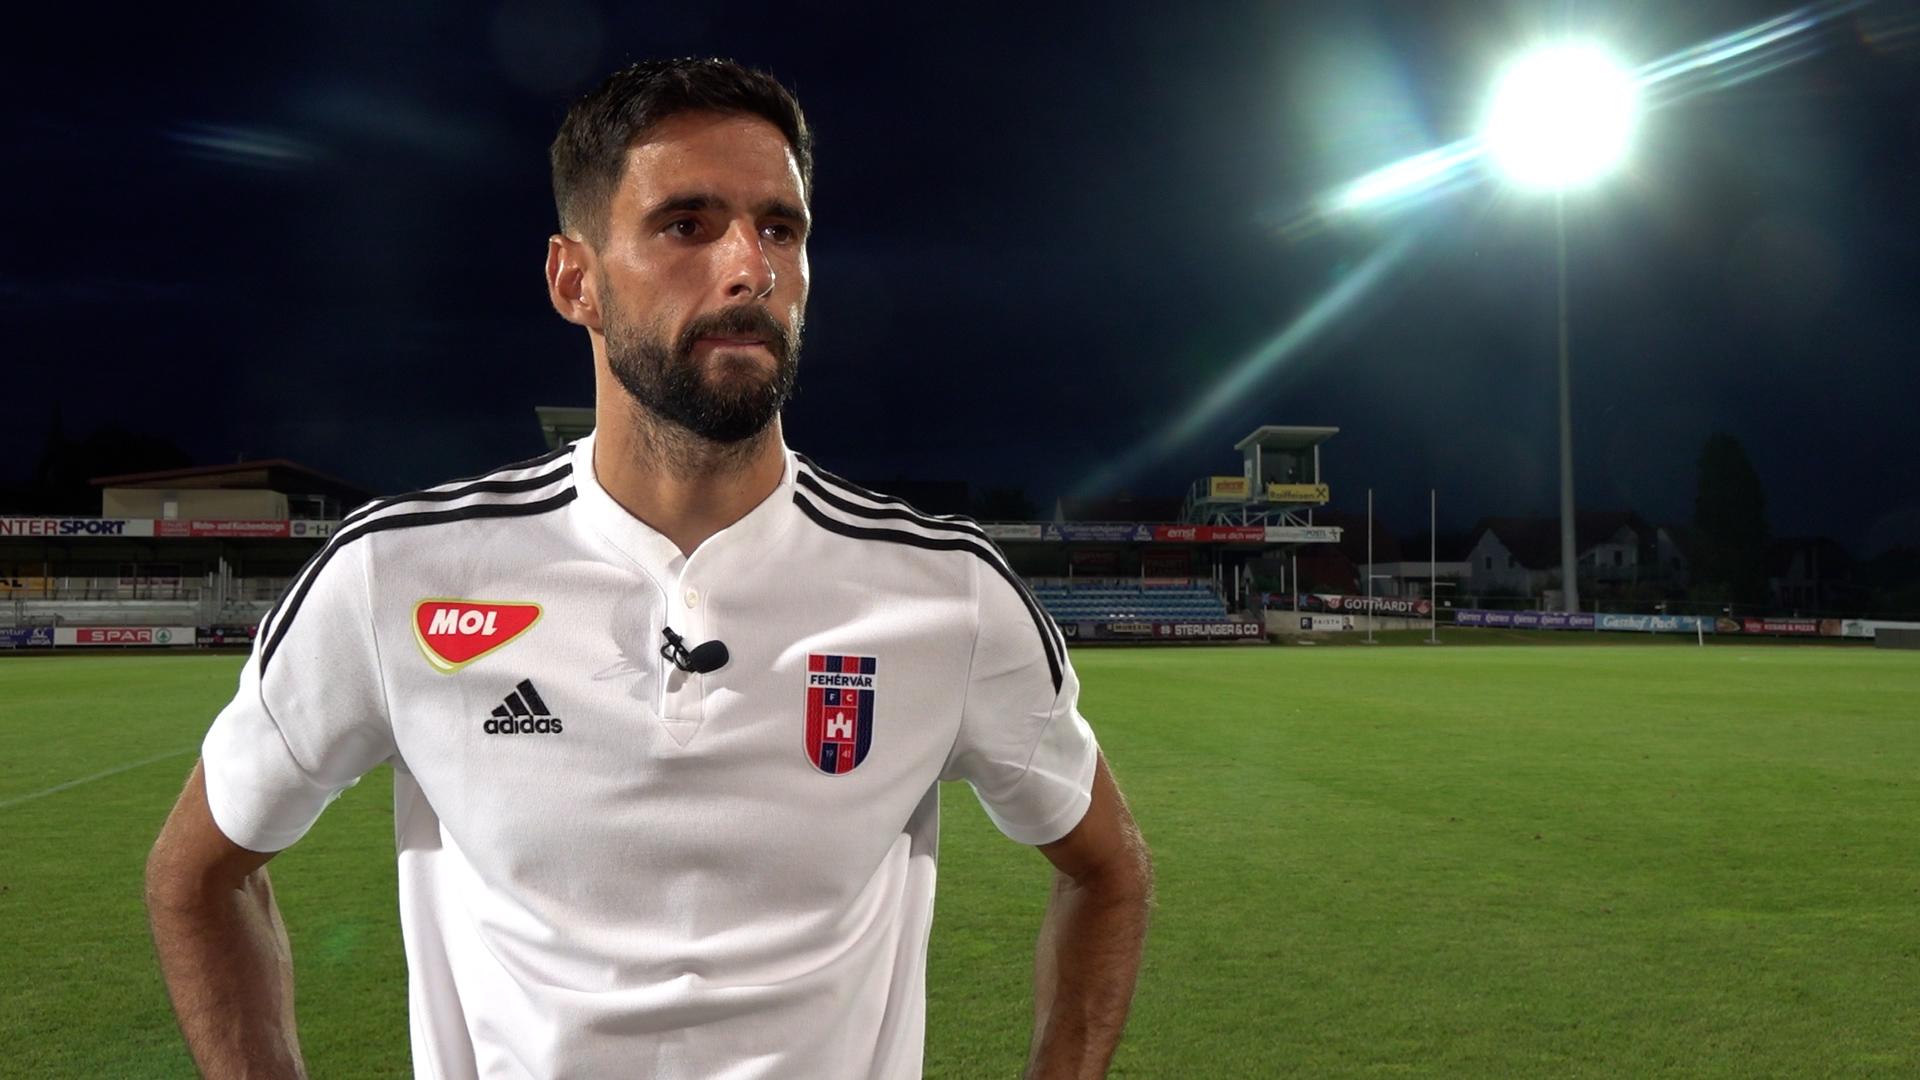 Kenan Kodro: It was a crazy game, but unfortunately we were not